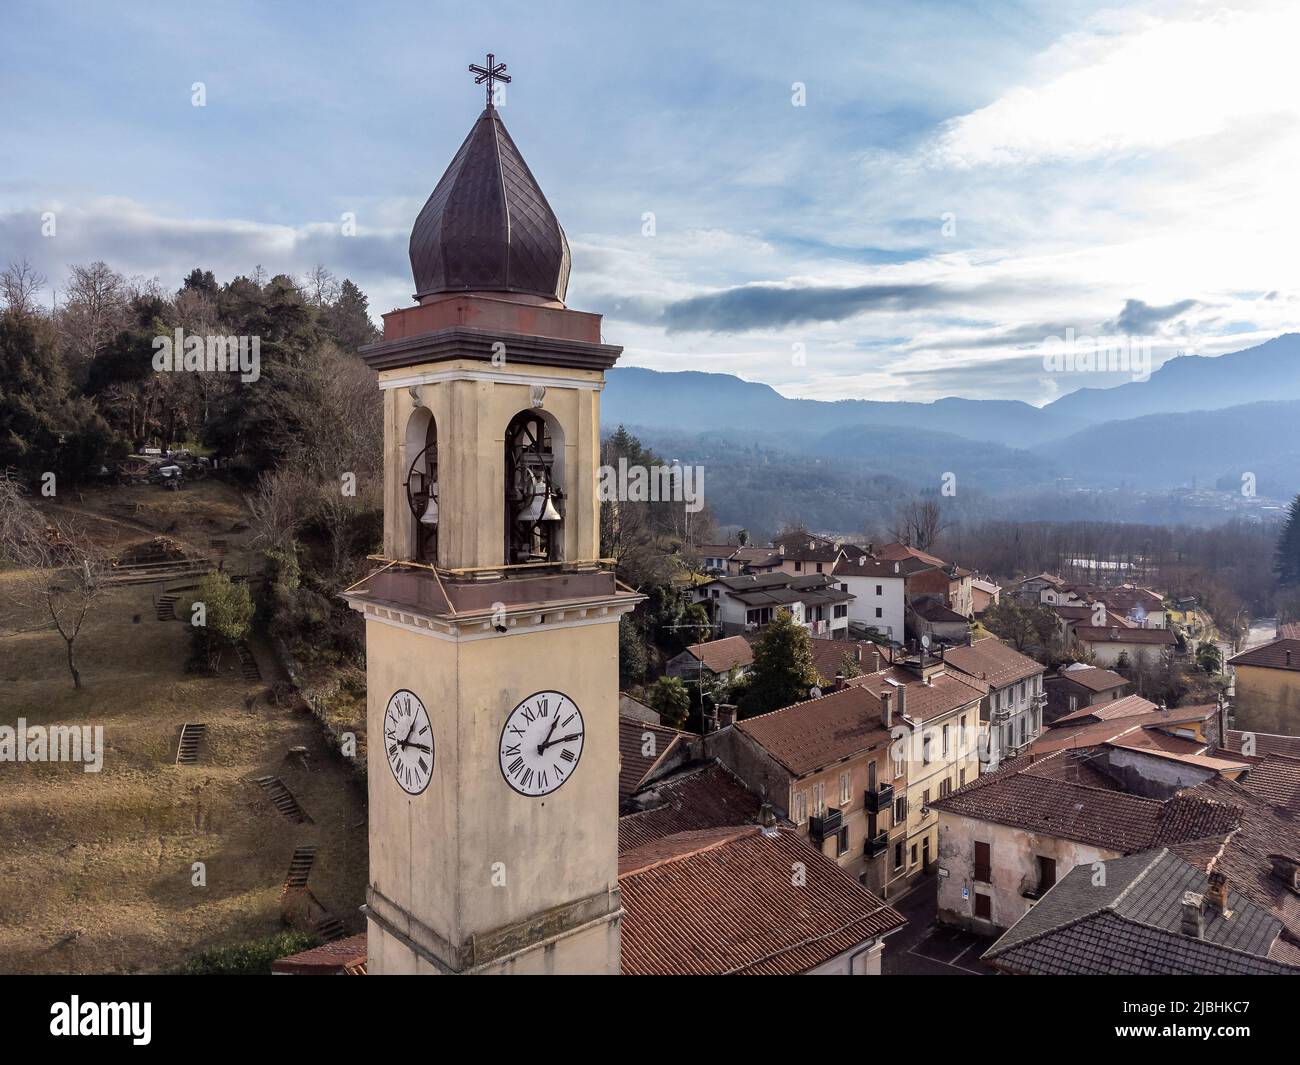 Aerial view of the bell tower of the Ippolito and Cassiano church in Cassano Valcuvia, province of Varese, Lombardy, Italy Stock Photo